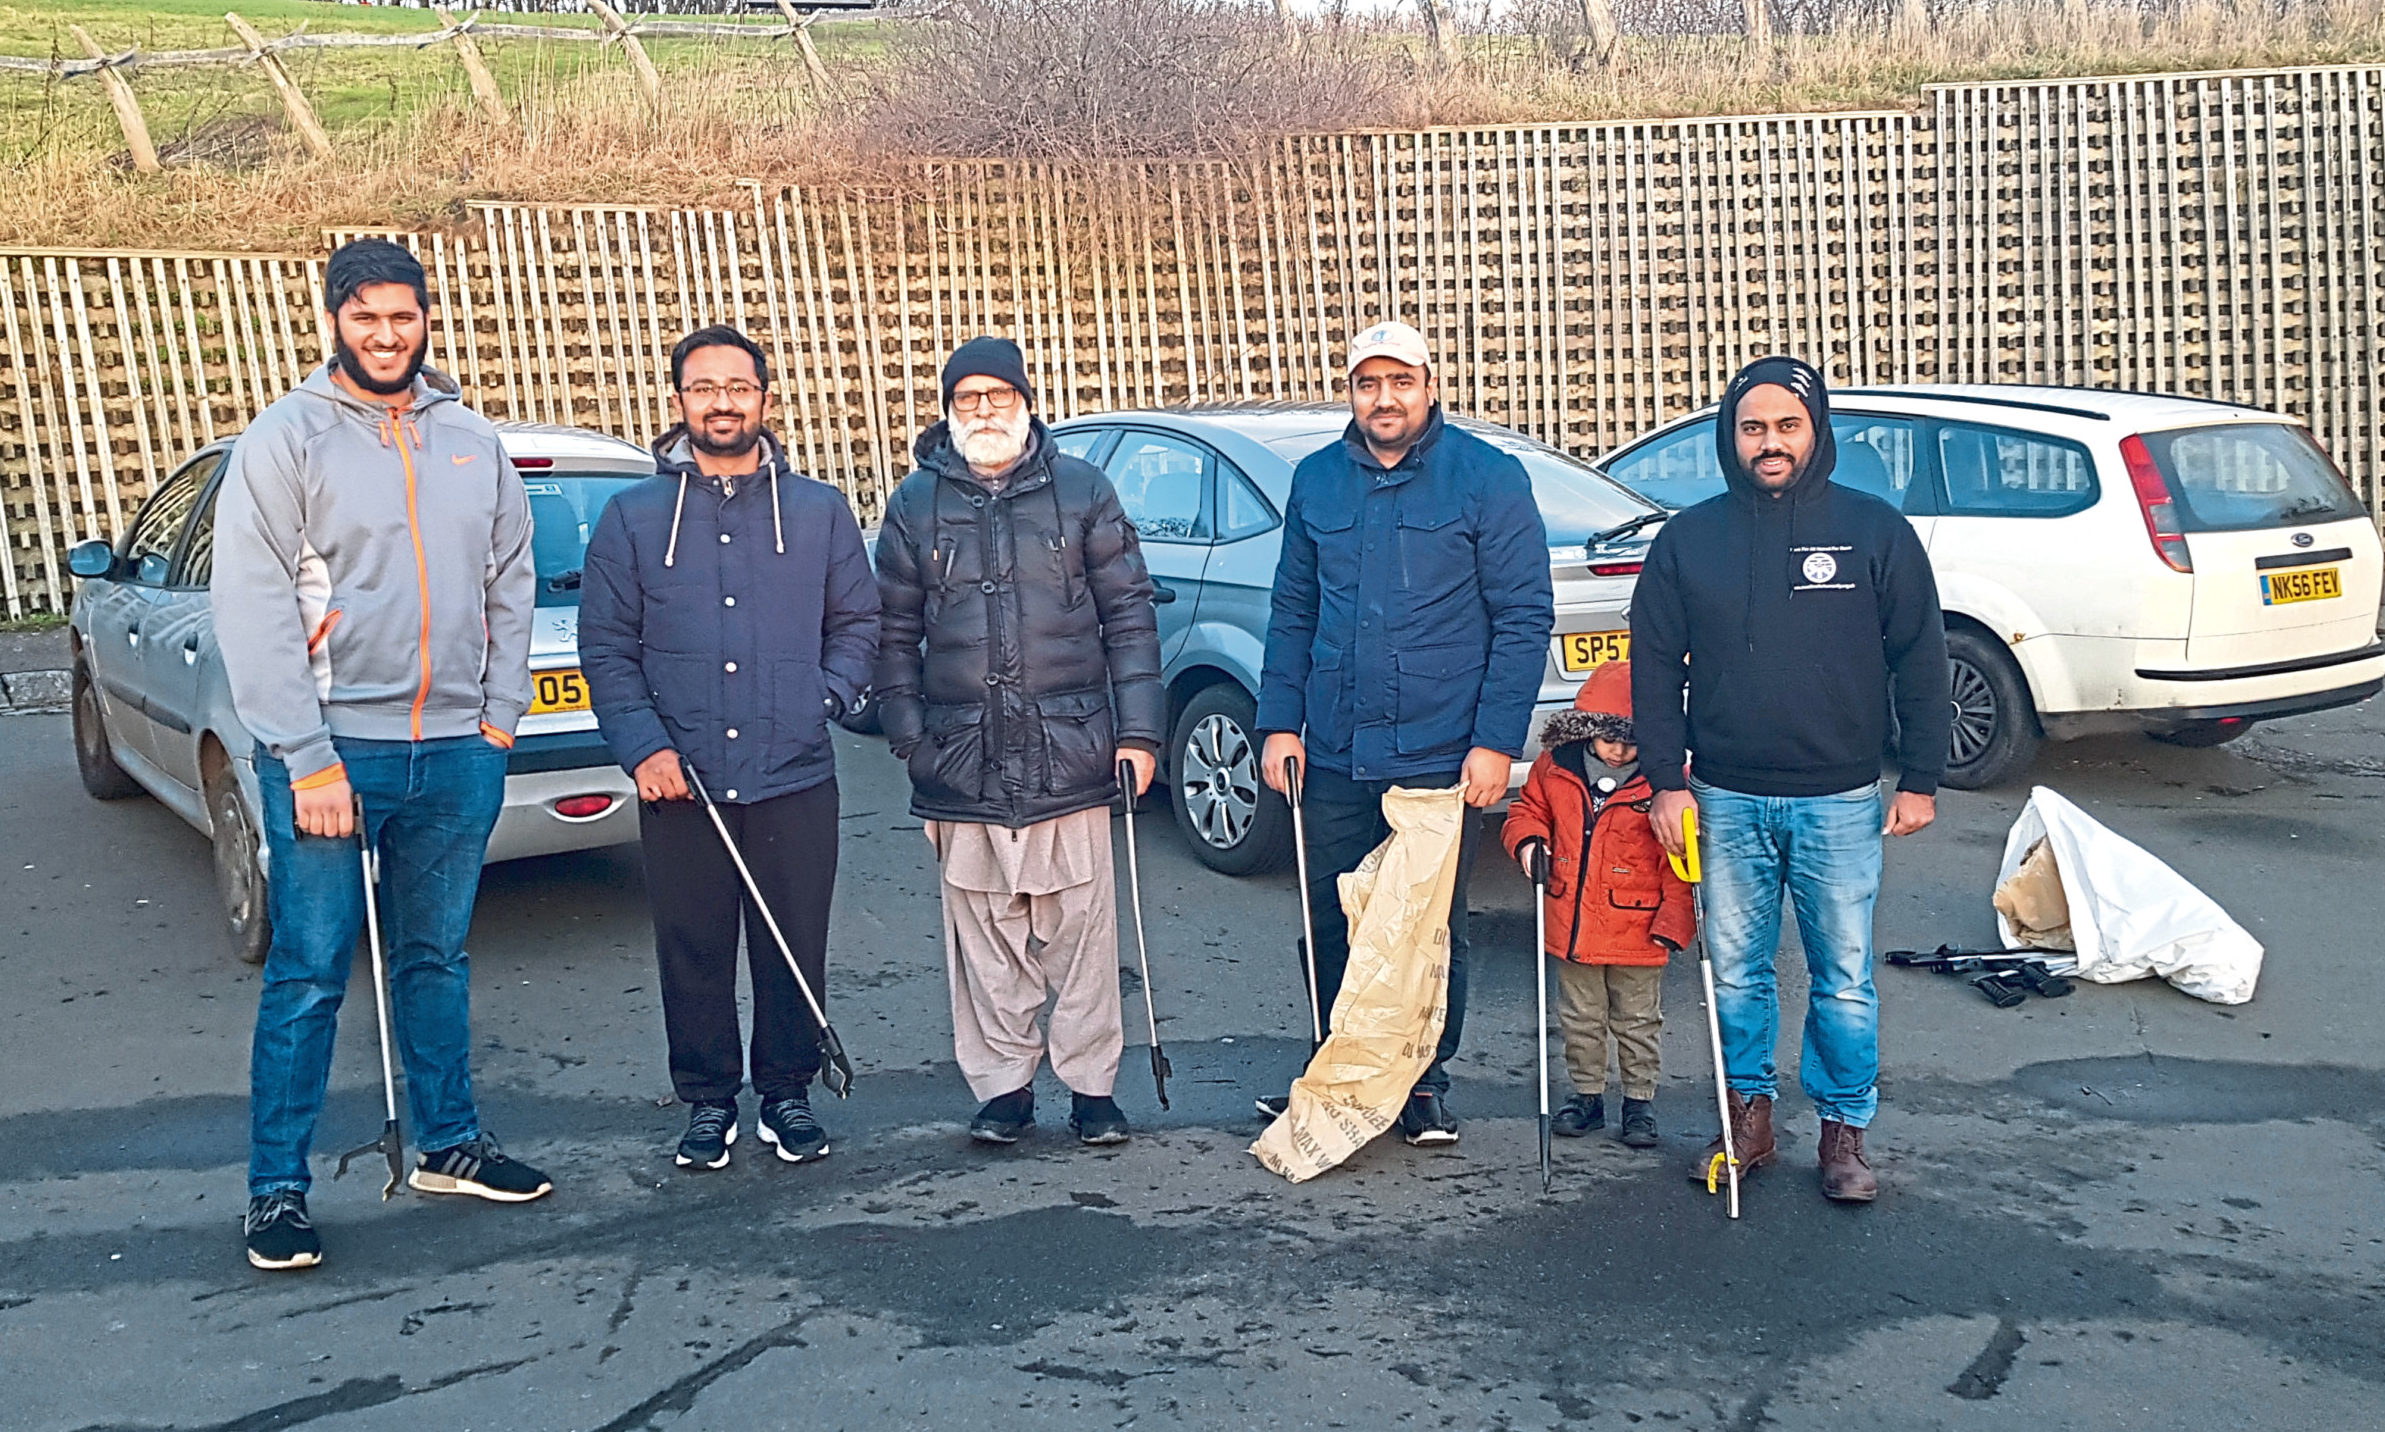 The Ahmadiyya Muslim youth clean up on Dundee Law.